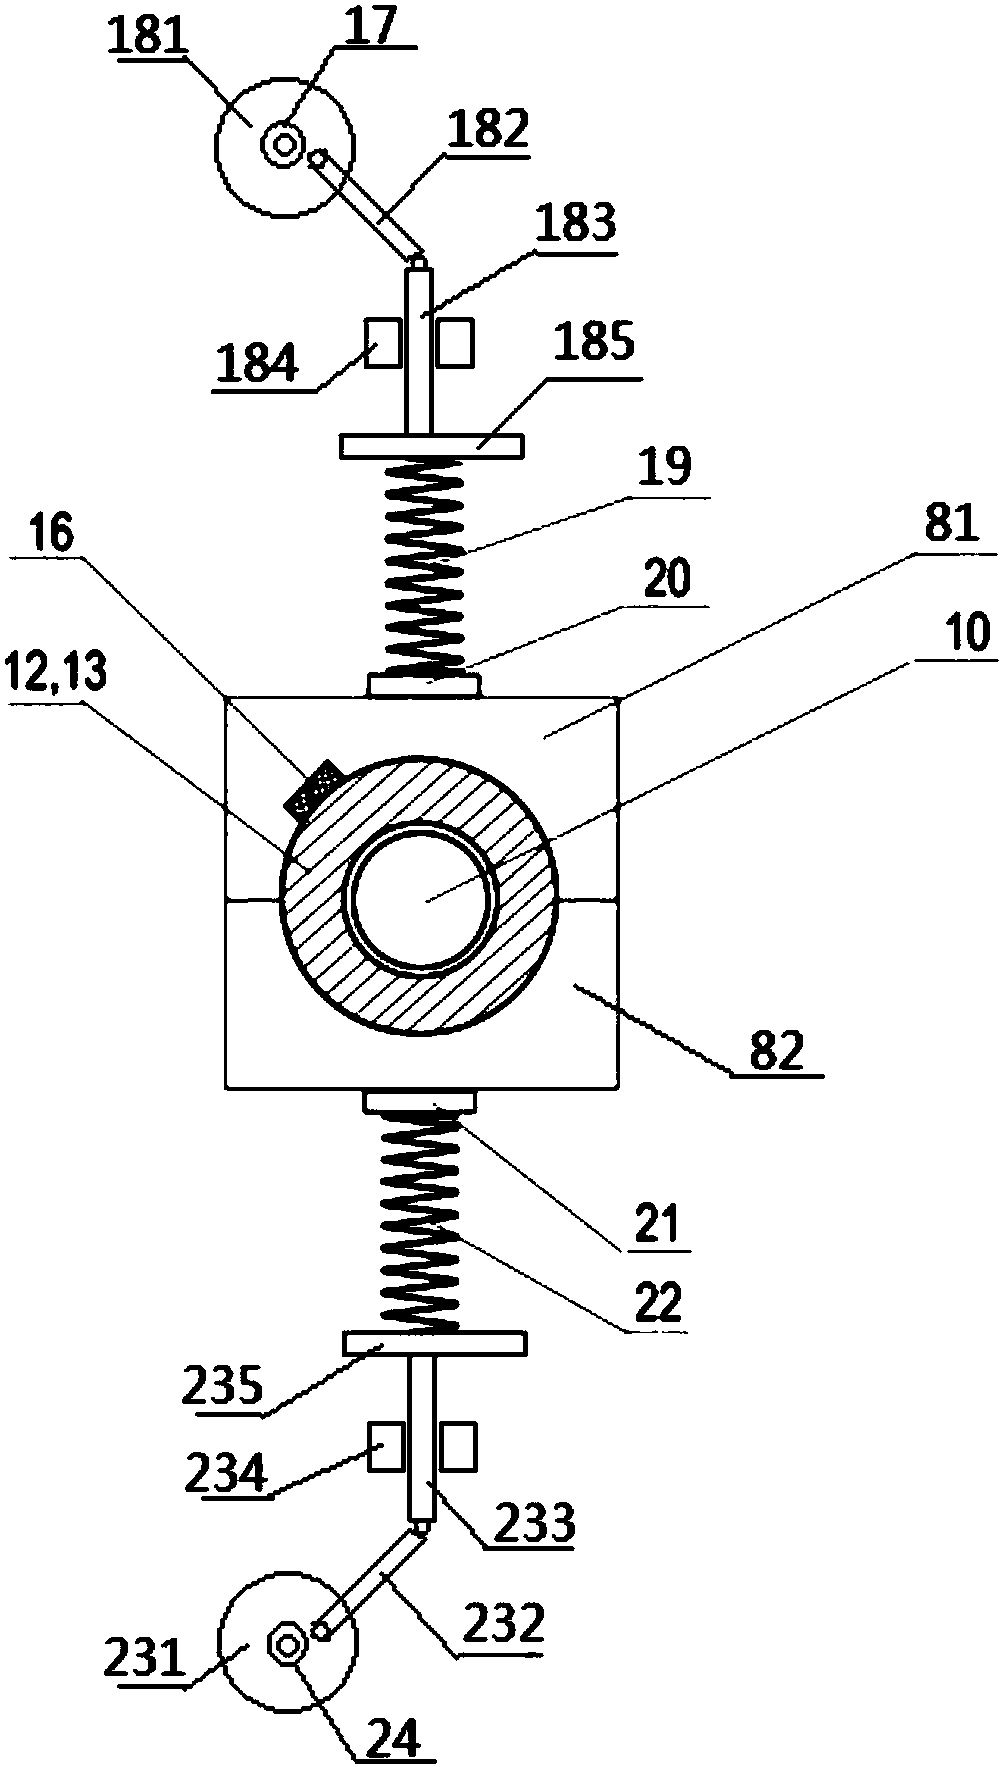 Antifriction bearing fatigue life testing device of crank connecting rod drive loading alternating load